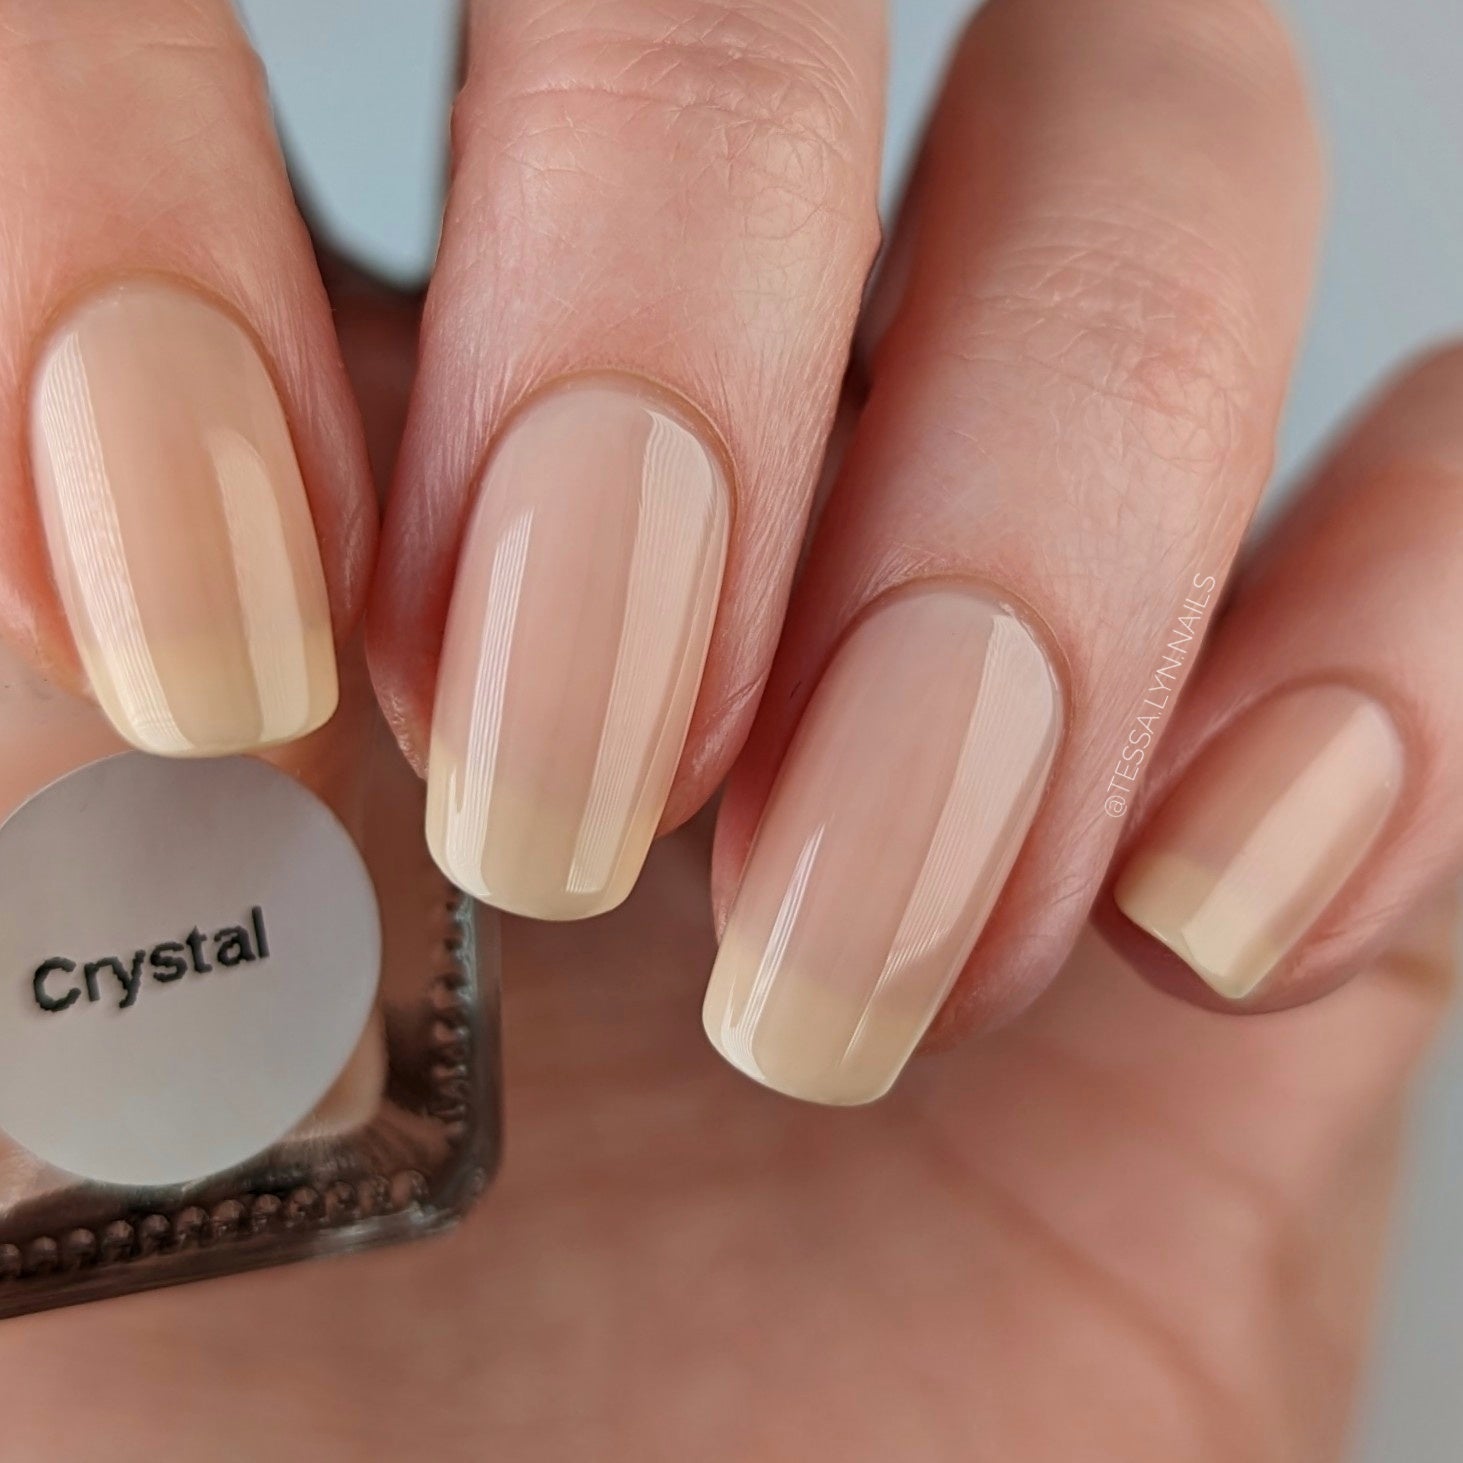 The Best Nude Nail Polish For Your Skin Tone | Evie Magazine